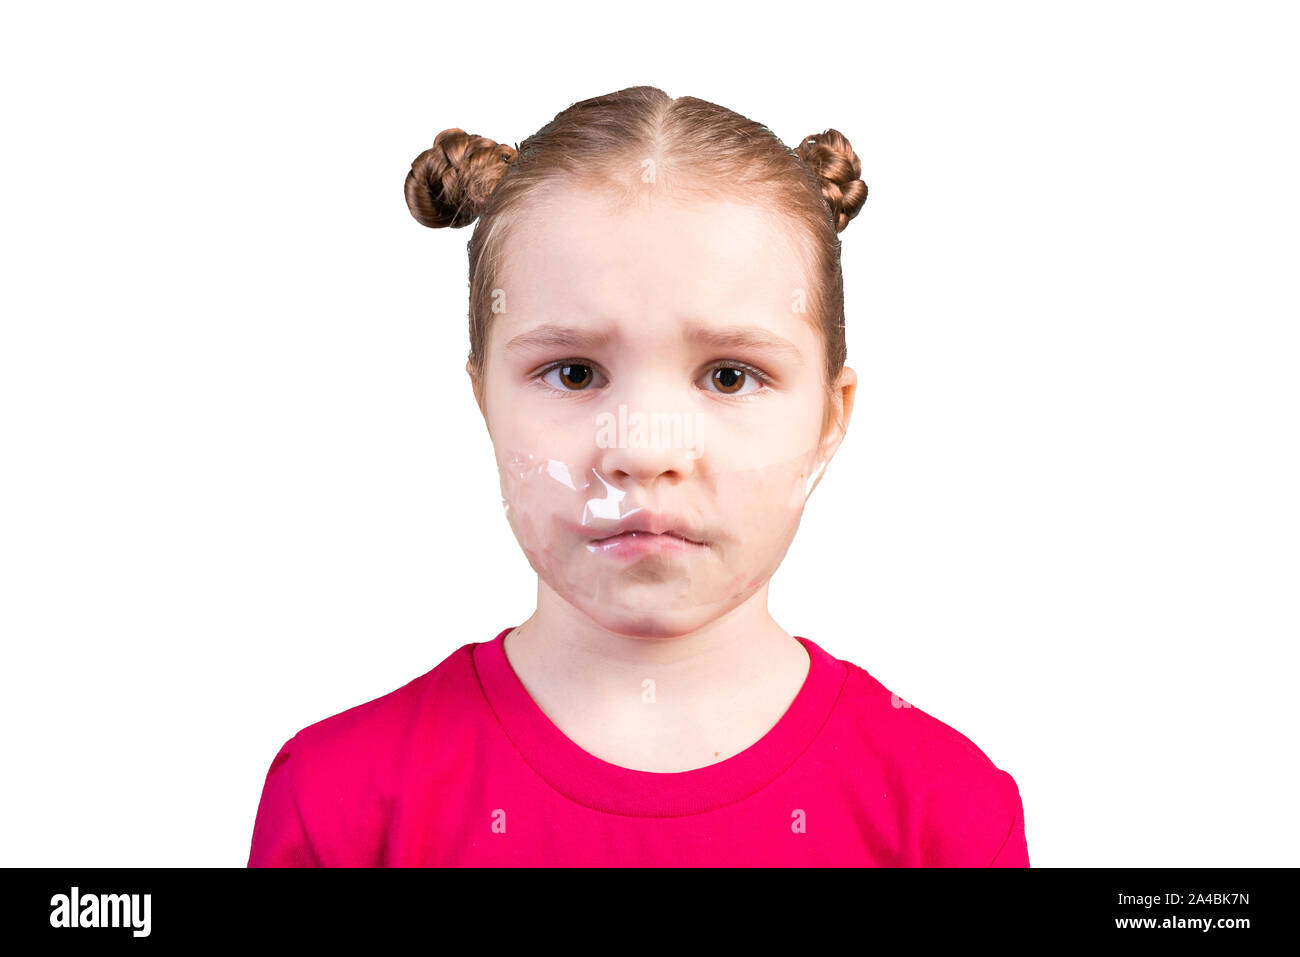 Girl with a sealed mouth. Isolated on a white background. Stock Photo